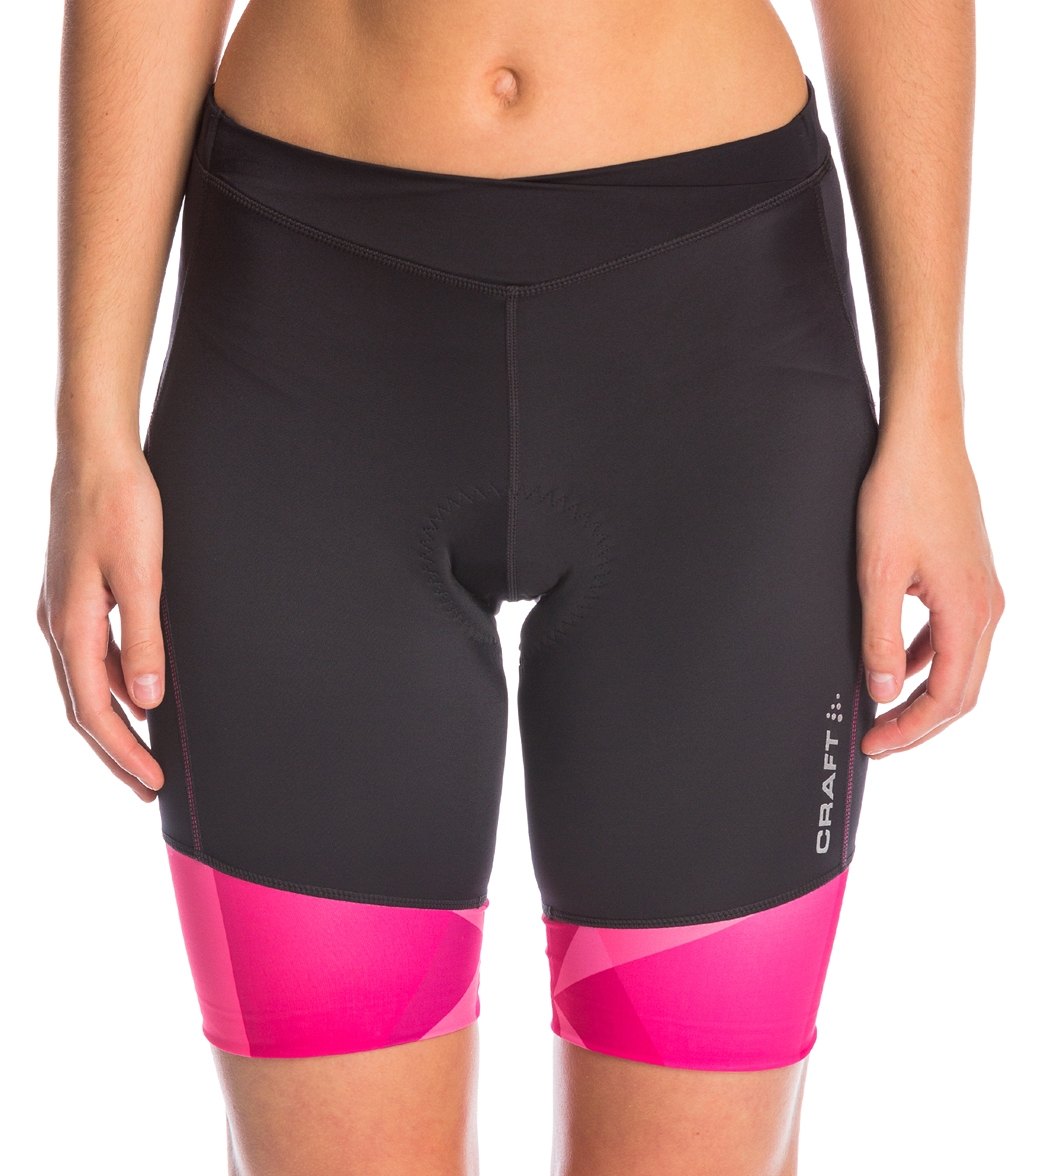 Craft Women's Velo Cycling Shorts at SwimOutlet.com - Free Shipping